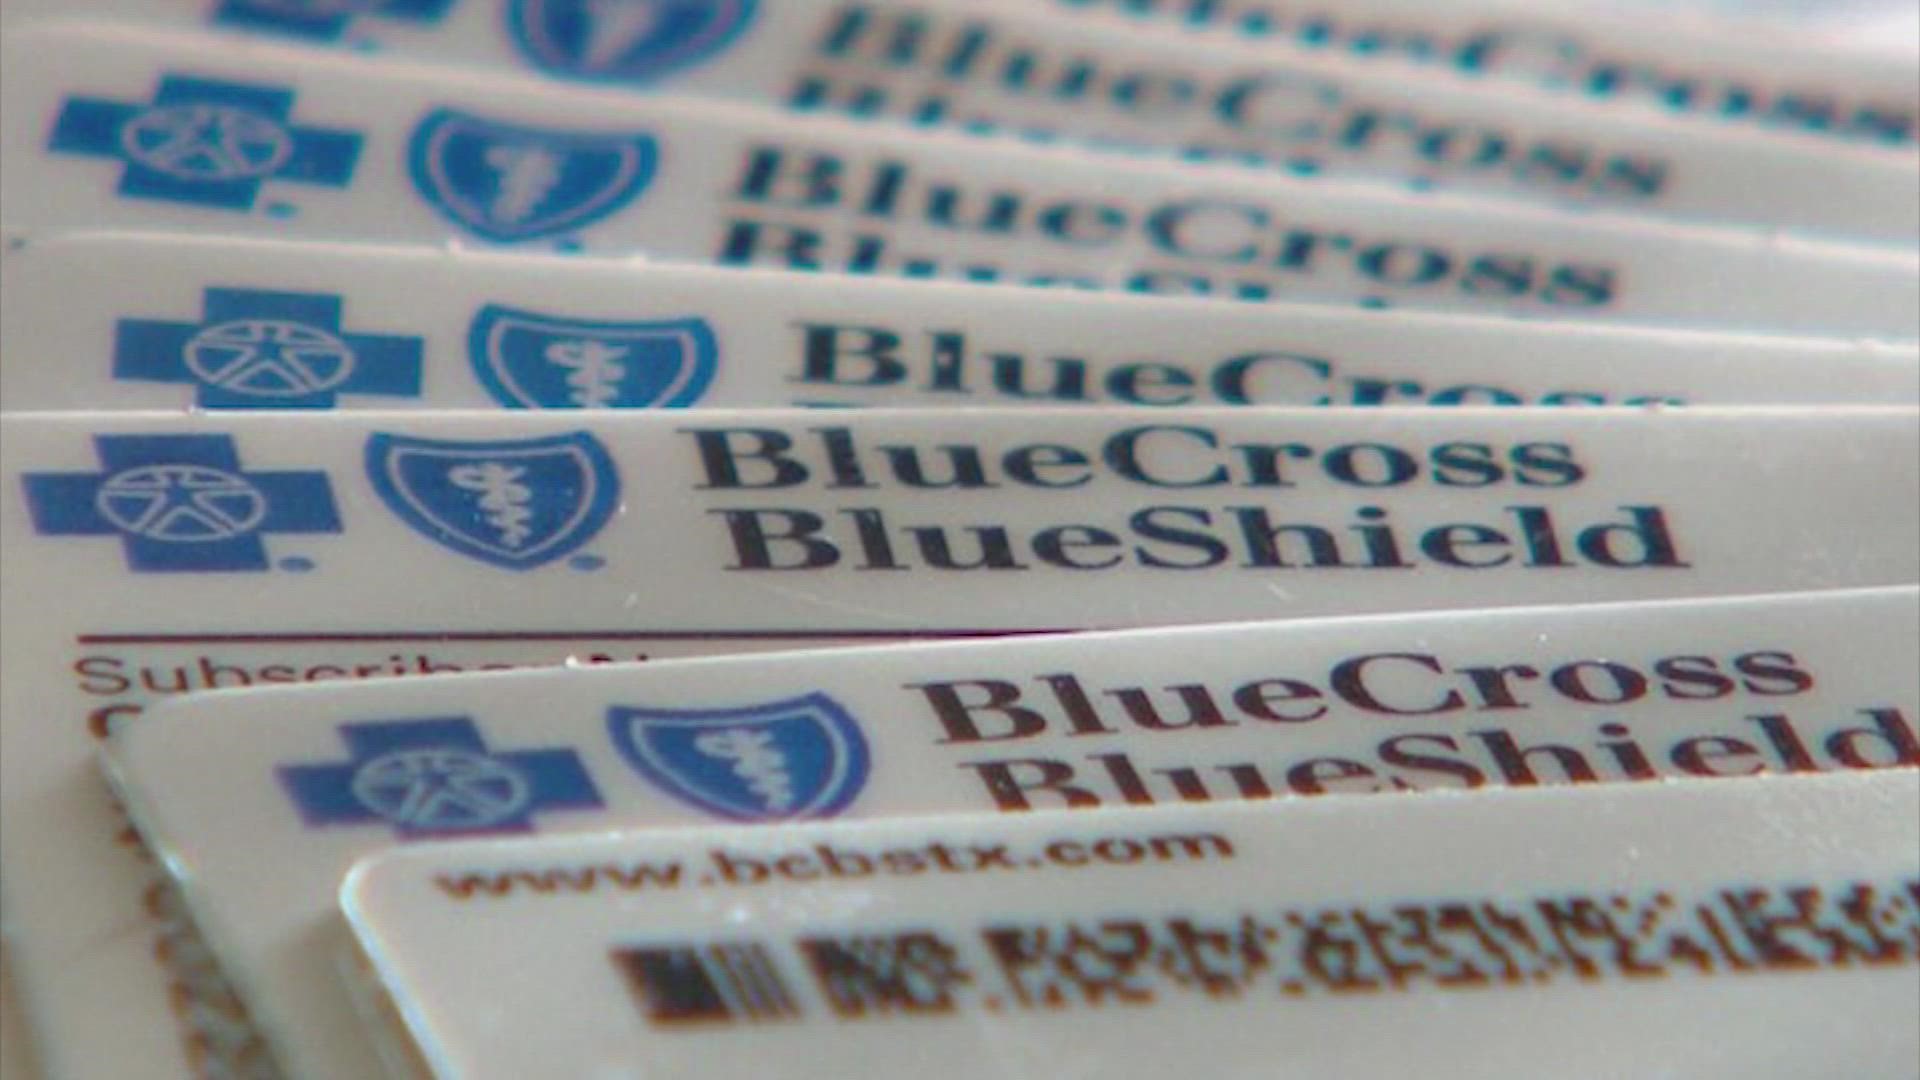 UPDATE: A Blue Cross Blue Shield representative has since confirmed that a new deal has been reached.